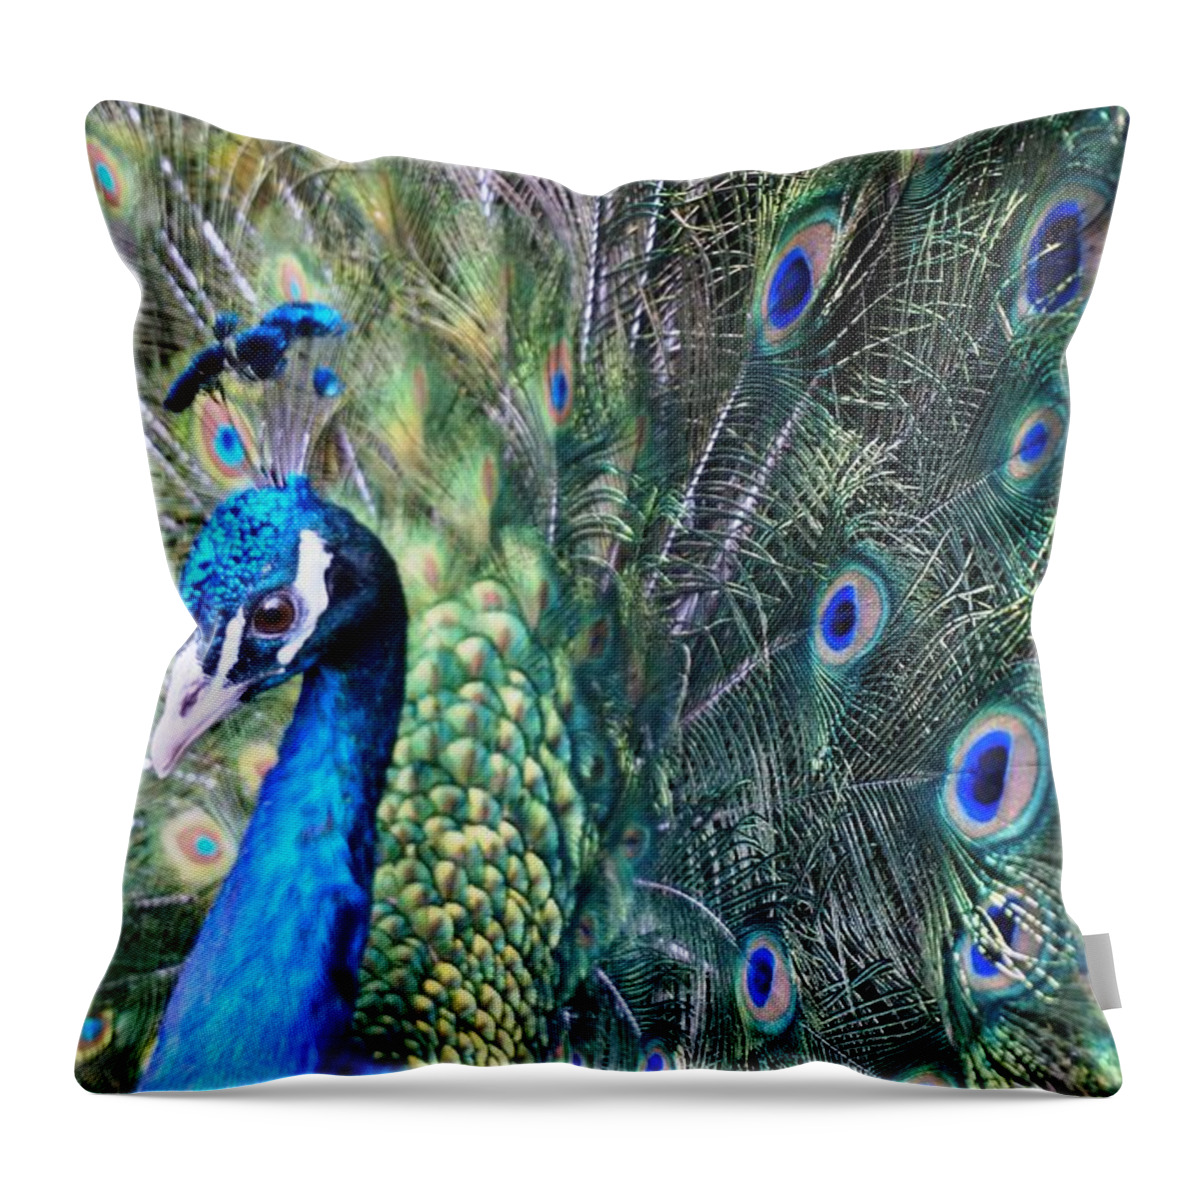 Peacock Throw Pillow featuring the photograph Peacock by Julia Ivanovna Willhite